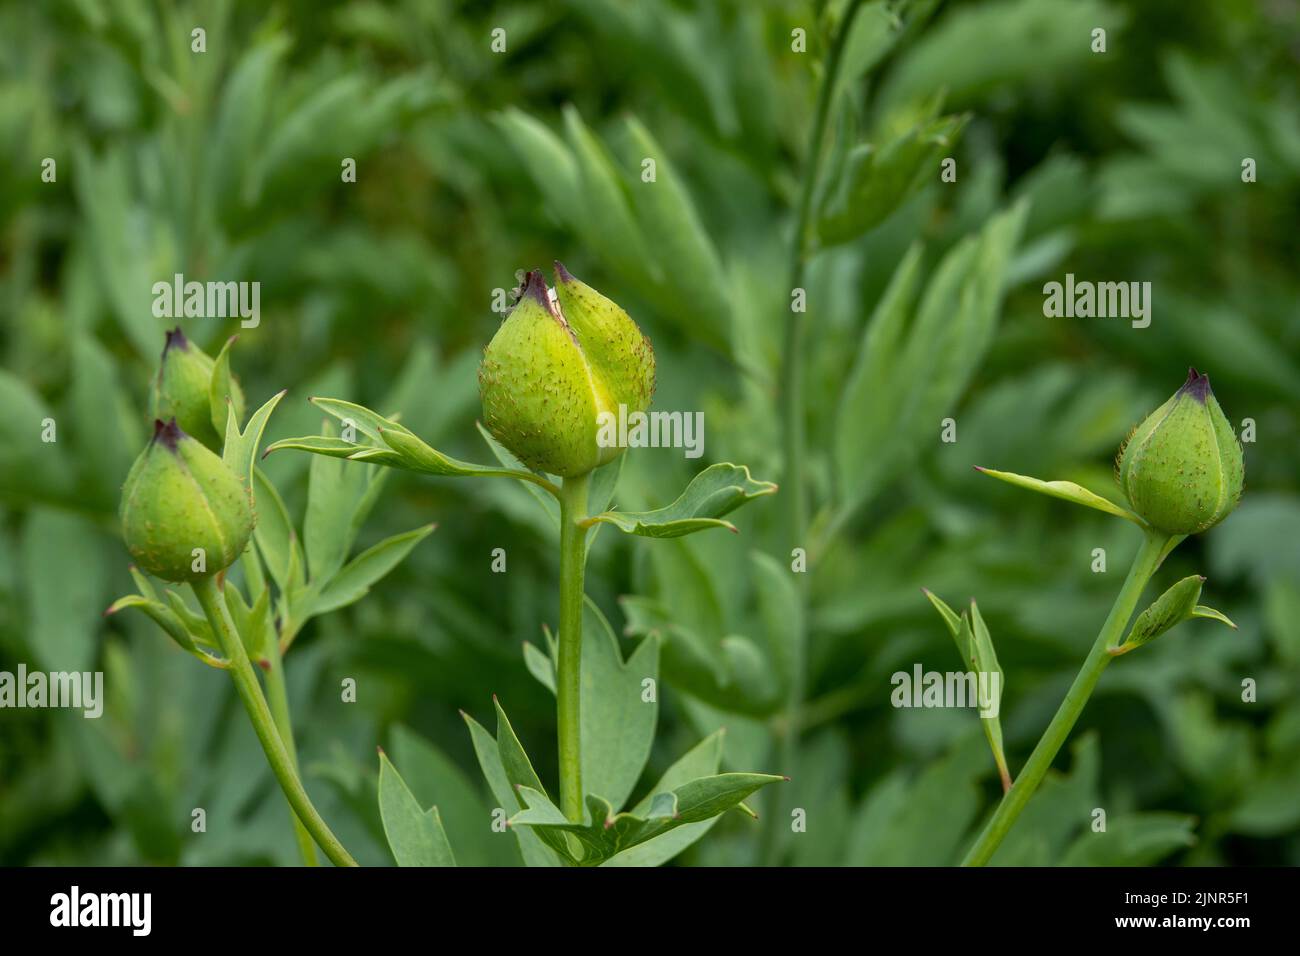 buds of the cosmos bipinnatus plant about to bloom Stock Photo